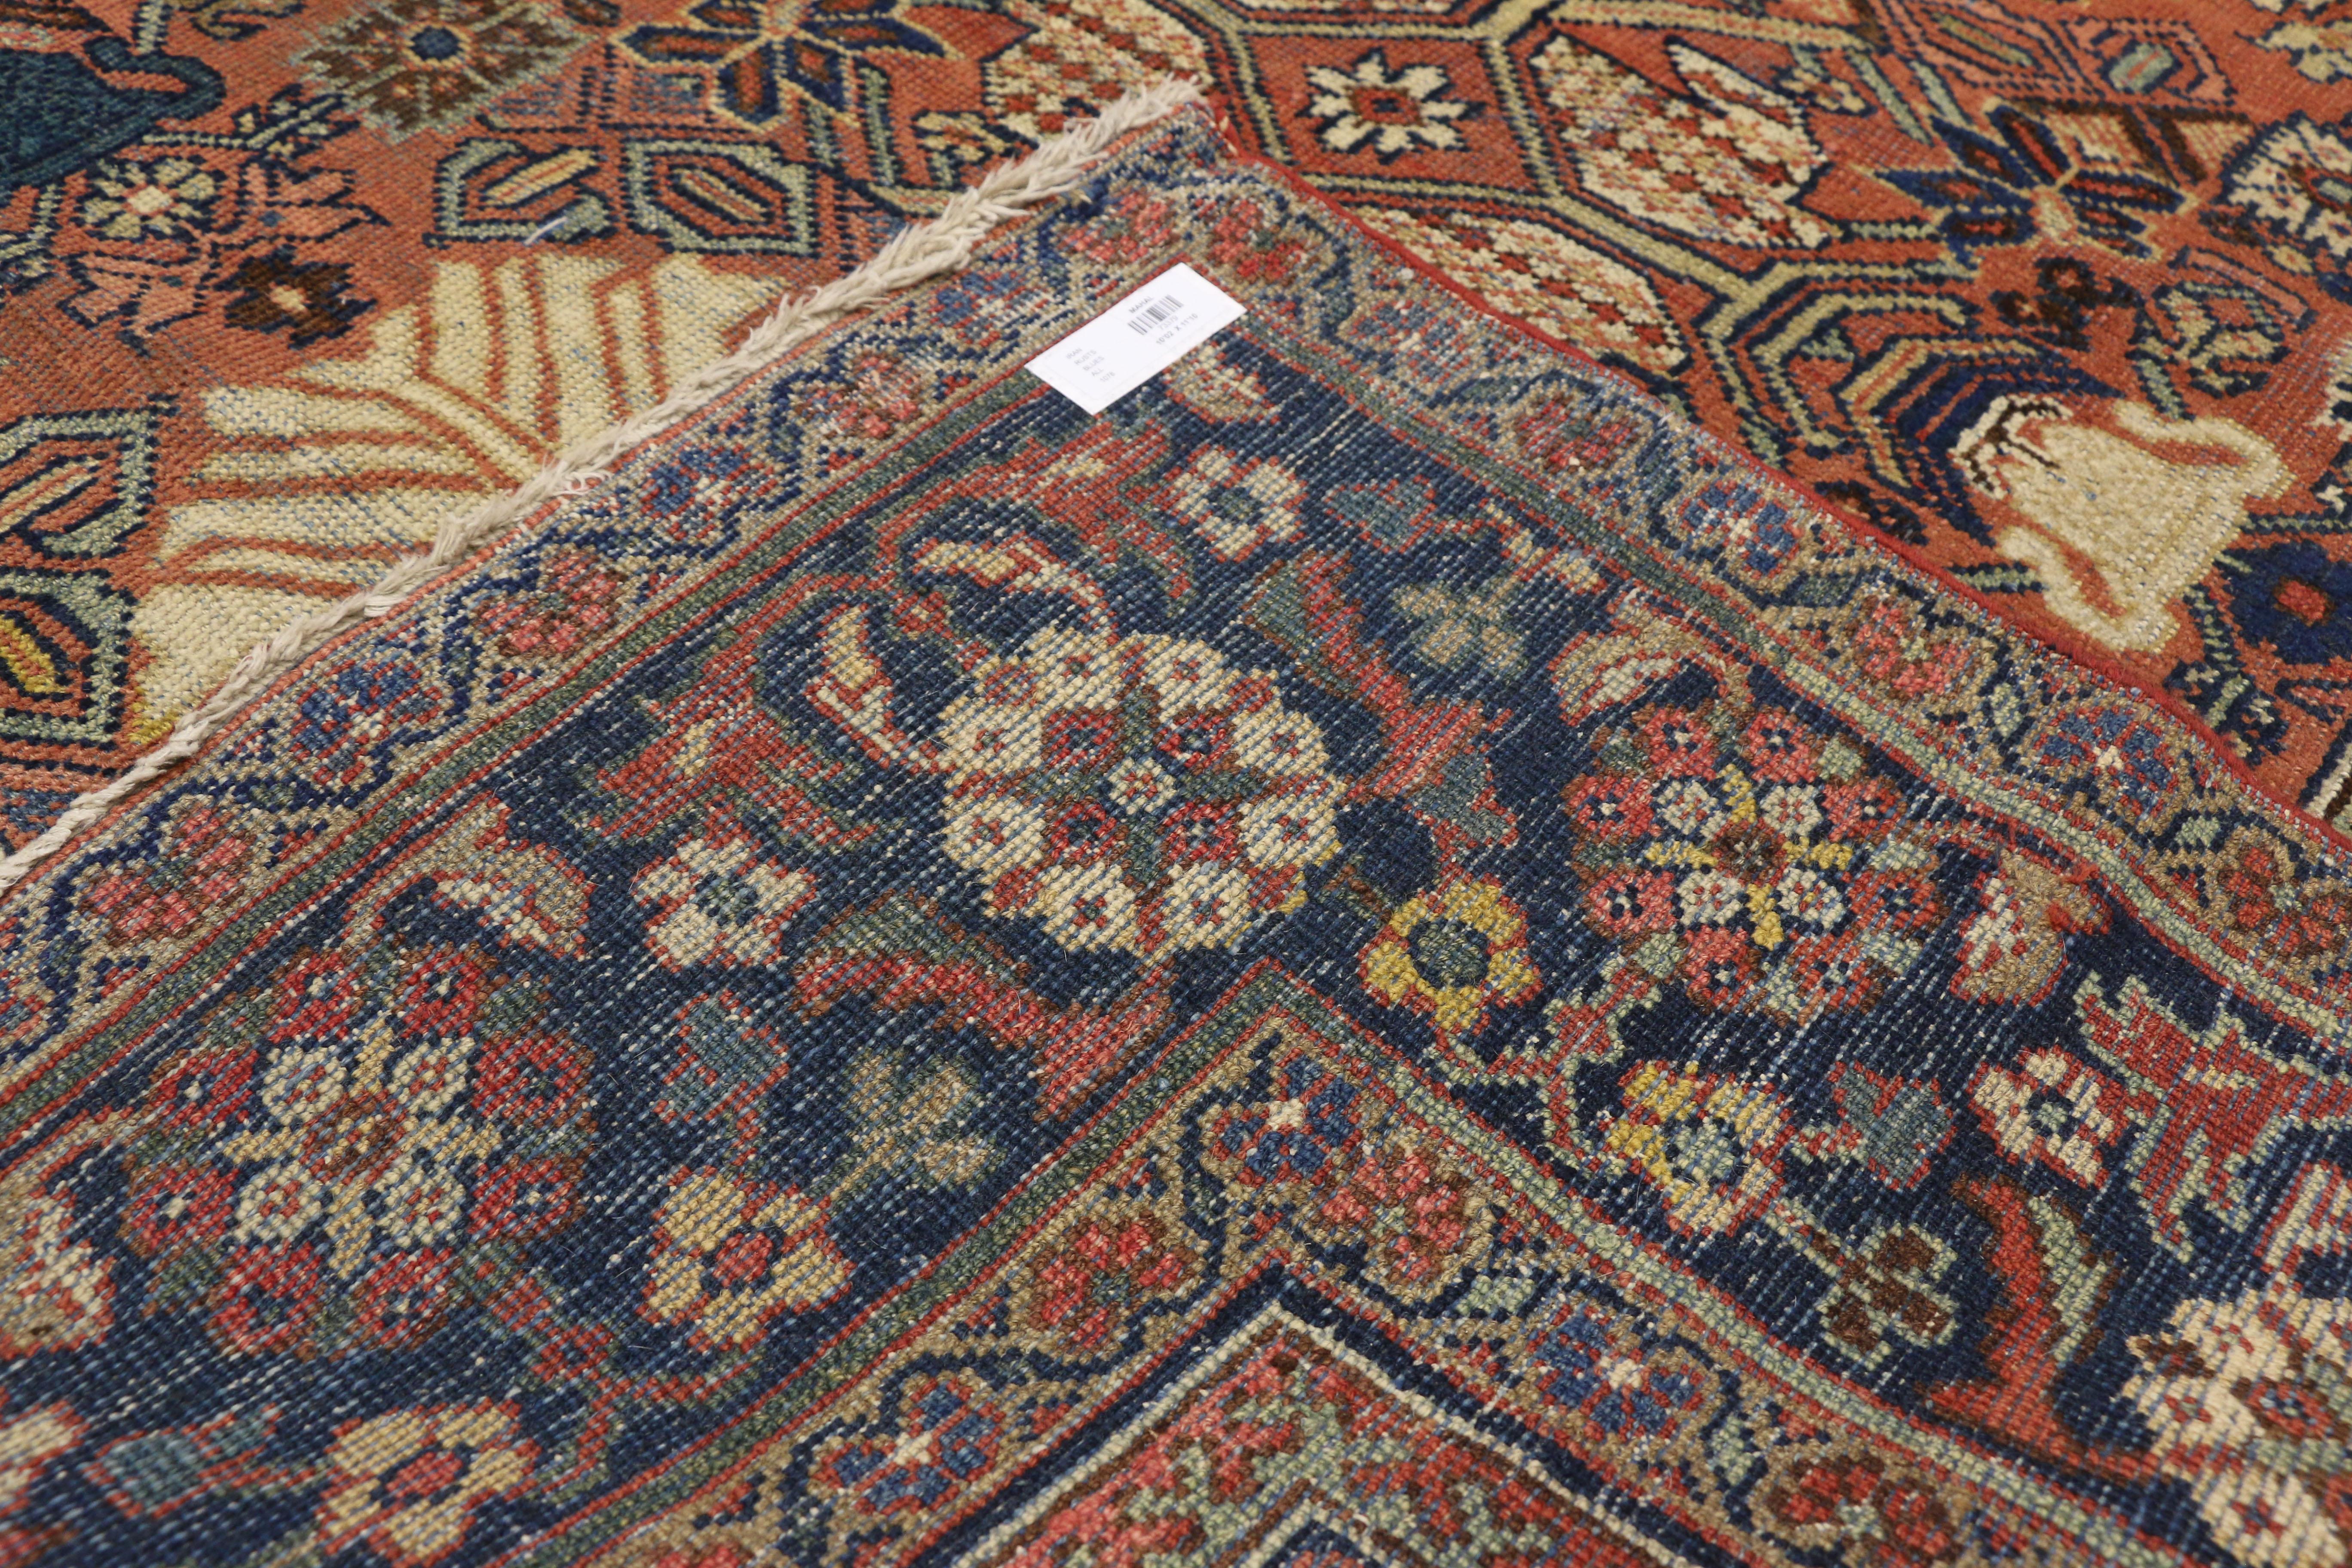 20th Century Antique Persian Mahal Rug with Rustic Arts and Crafts Style